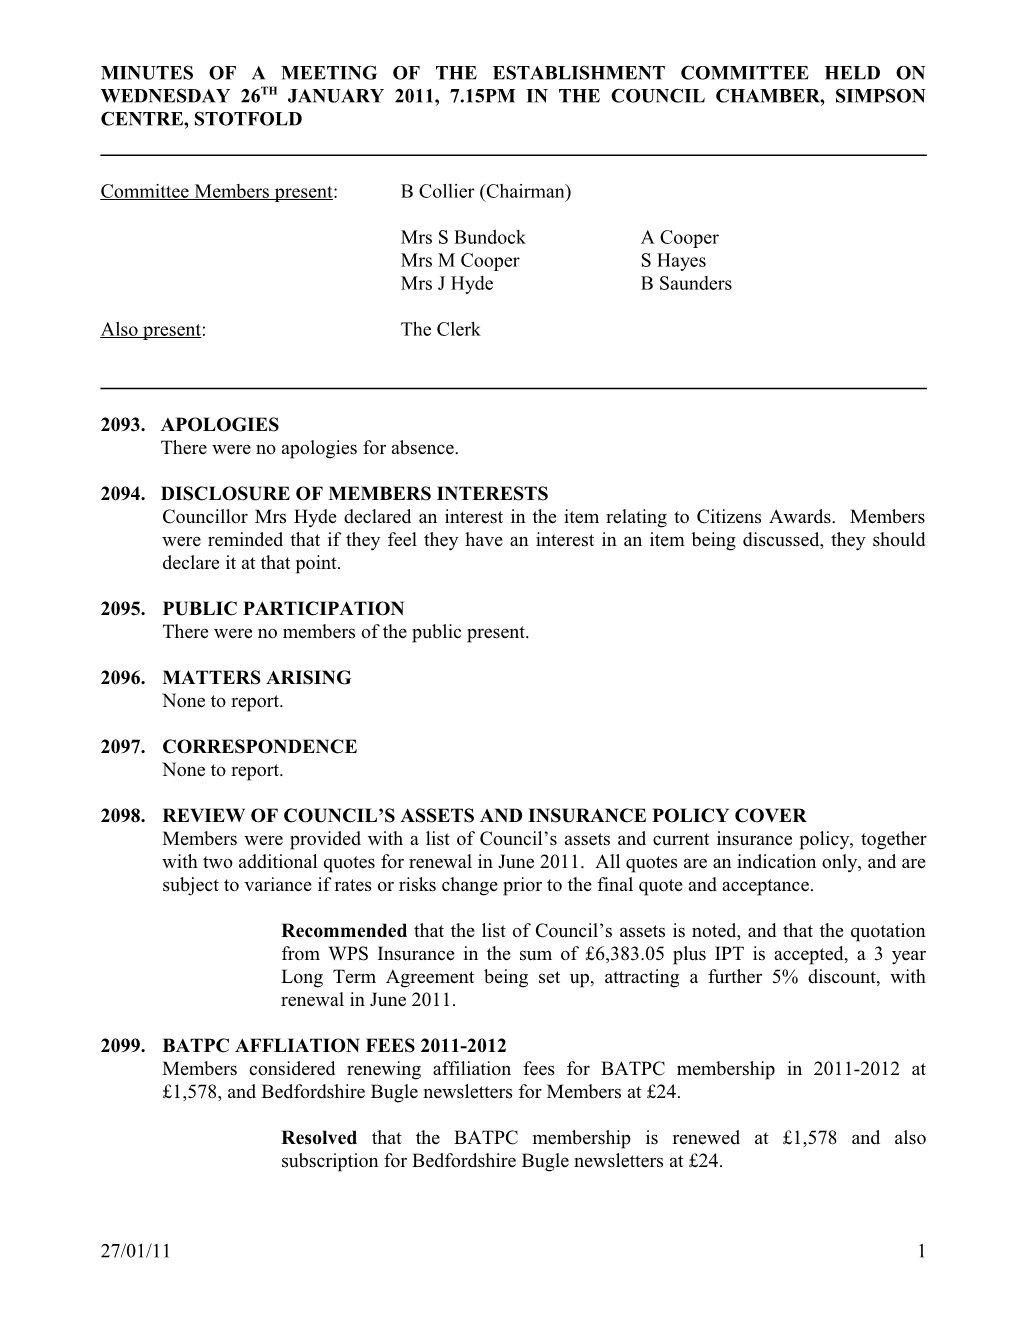 Minutes of a Meeting of the Establishment Committee Held on Wednesday 26Th January 2011